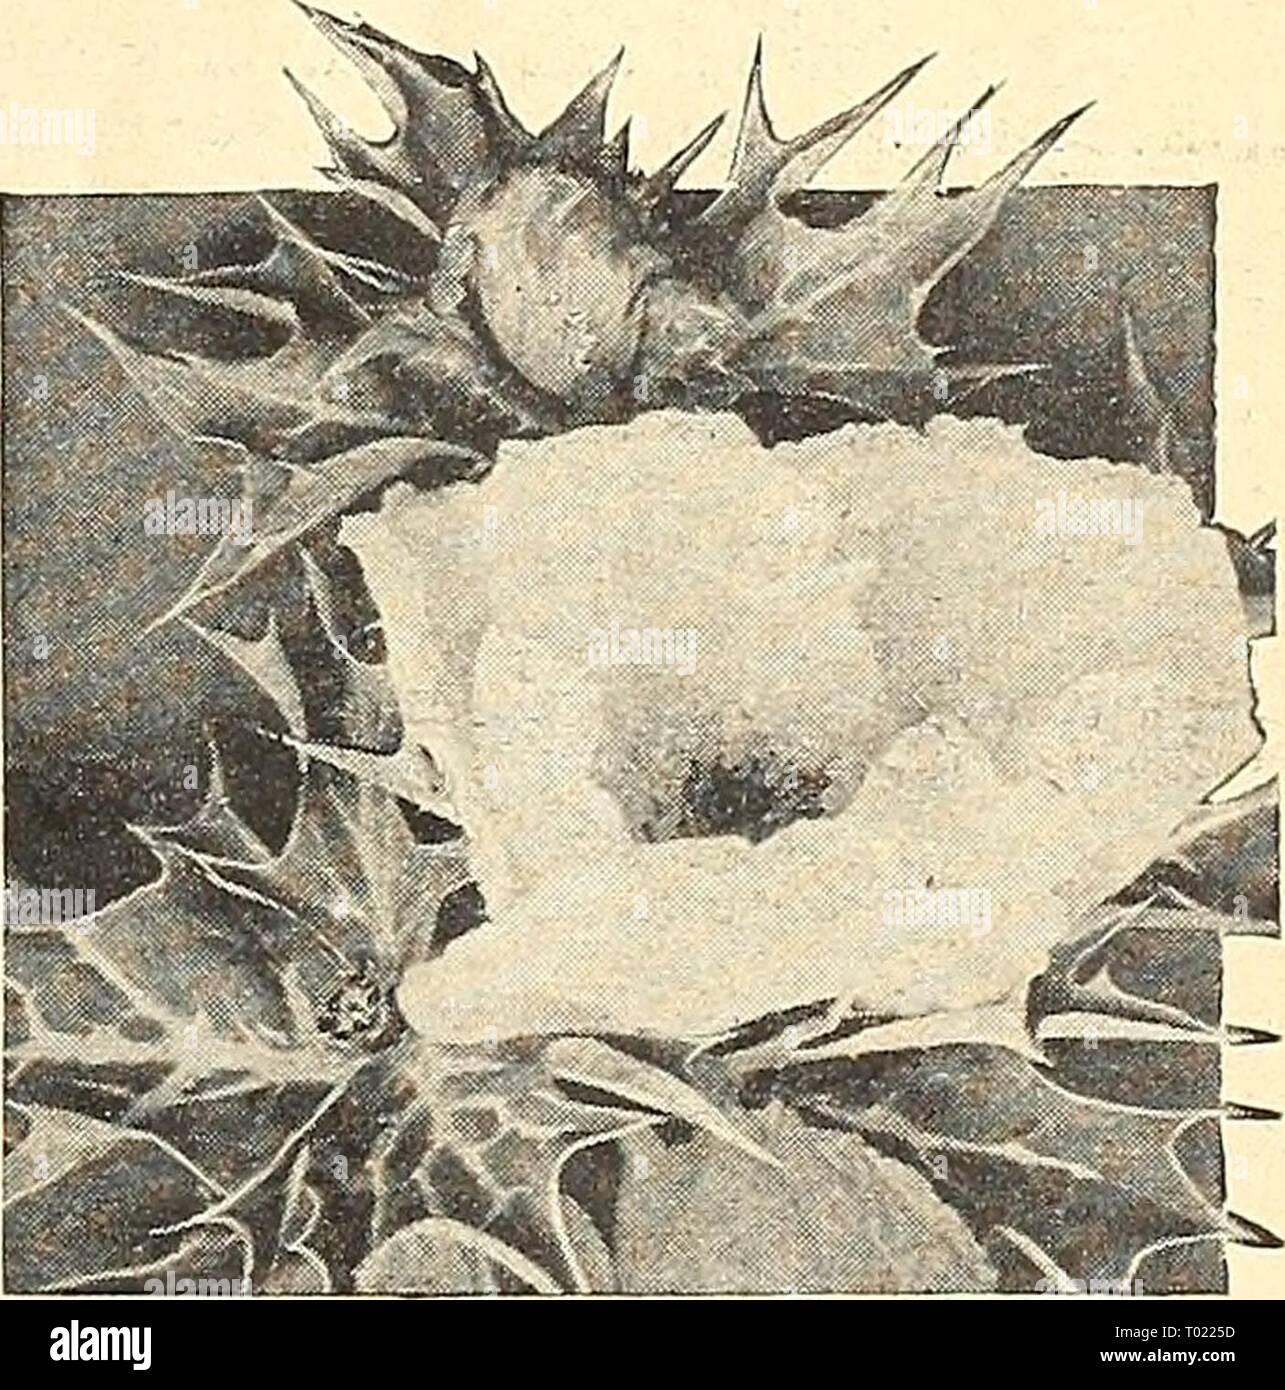 Dreer's garden book for 1943 . dreersgardenbook1943henr Year: 1943  Arctotis grandis Blue-Eyed African Daisy Arctotis—African Daisy ® 1237 Grandis {Blue-eyed African Daisy). Handsome bushes 2 to 3 feet tall covered with large pure white Daisy-like blooms having a pale lilac- blue reverse. July until frost. Pkt. 10c; li oz. 30c; oz. $1.00. 1240 Hybrids Mixed. Has showy large blooms 2^ to 3 inches across and comes in a variety of showy colors. Does well in dry soil. 8 to 12 in. July to frost. Pkt. 20c; large pkt. 75c.    Aubrietia—Rainbow Rock Cress Argemone hybrida grandiflora Argemone ® Mexica Stock Photo